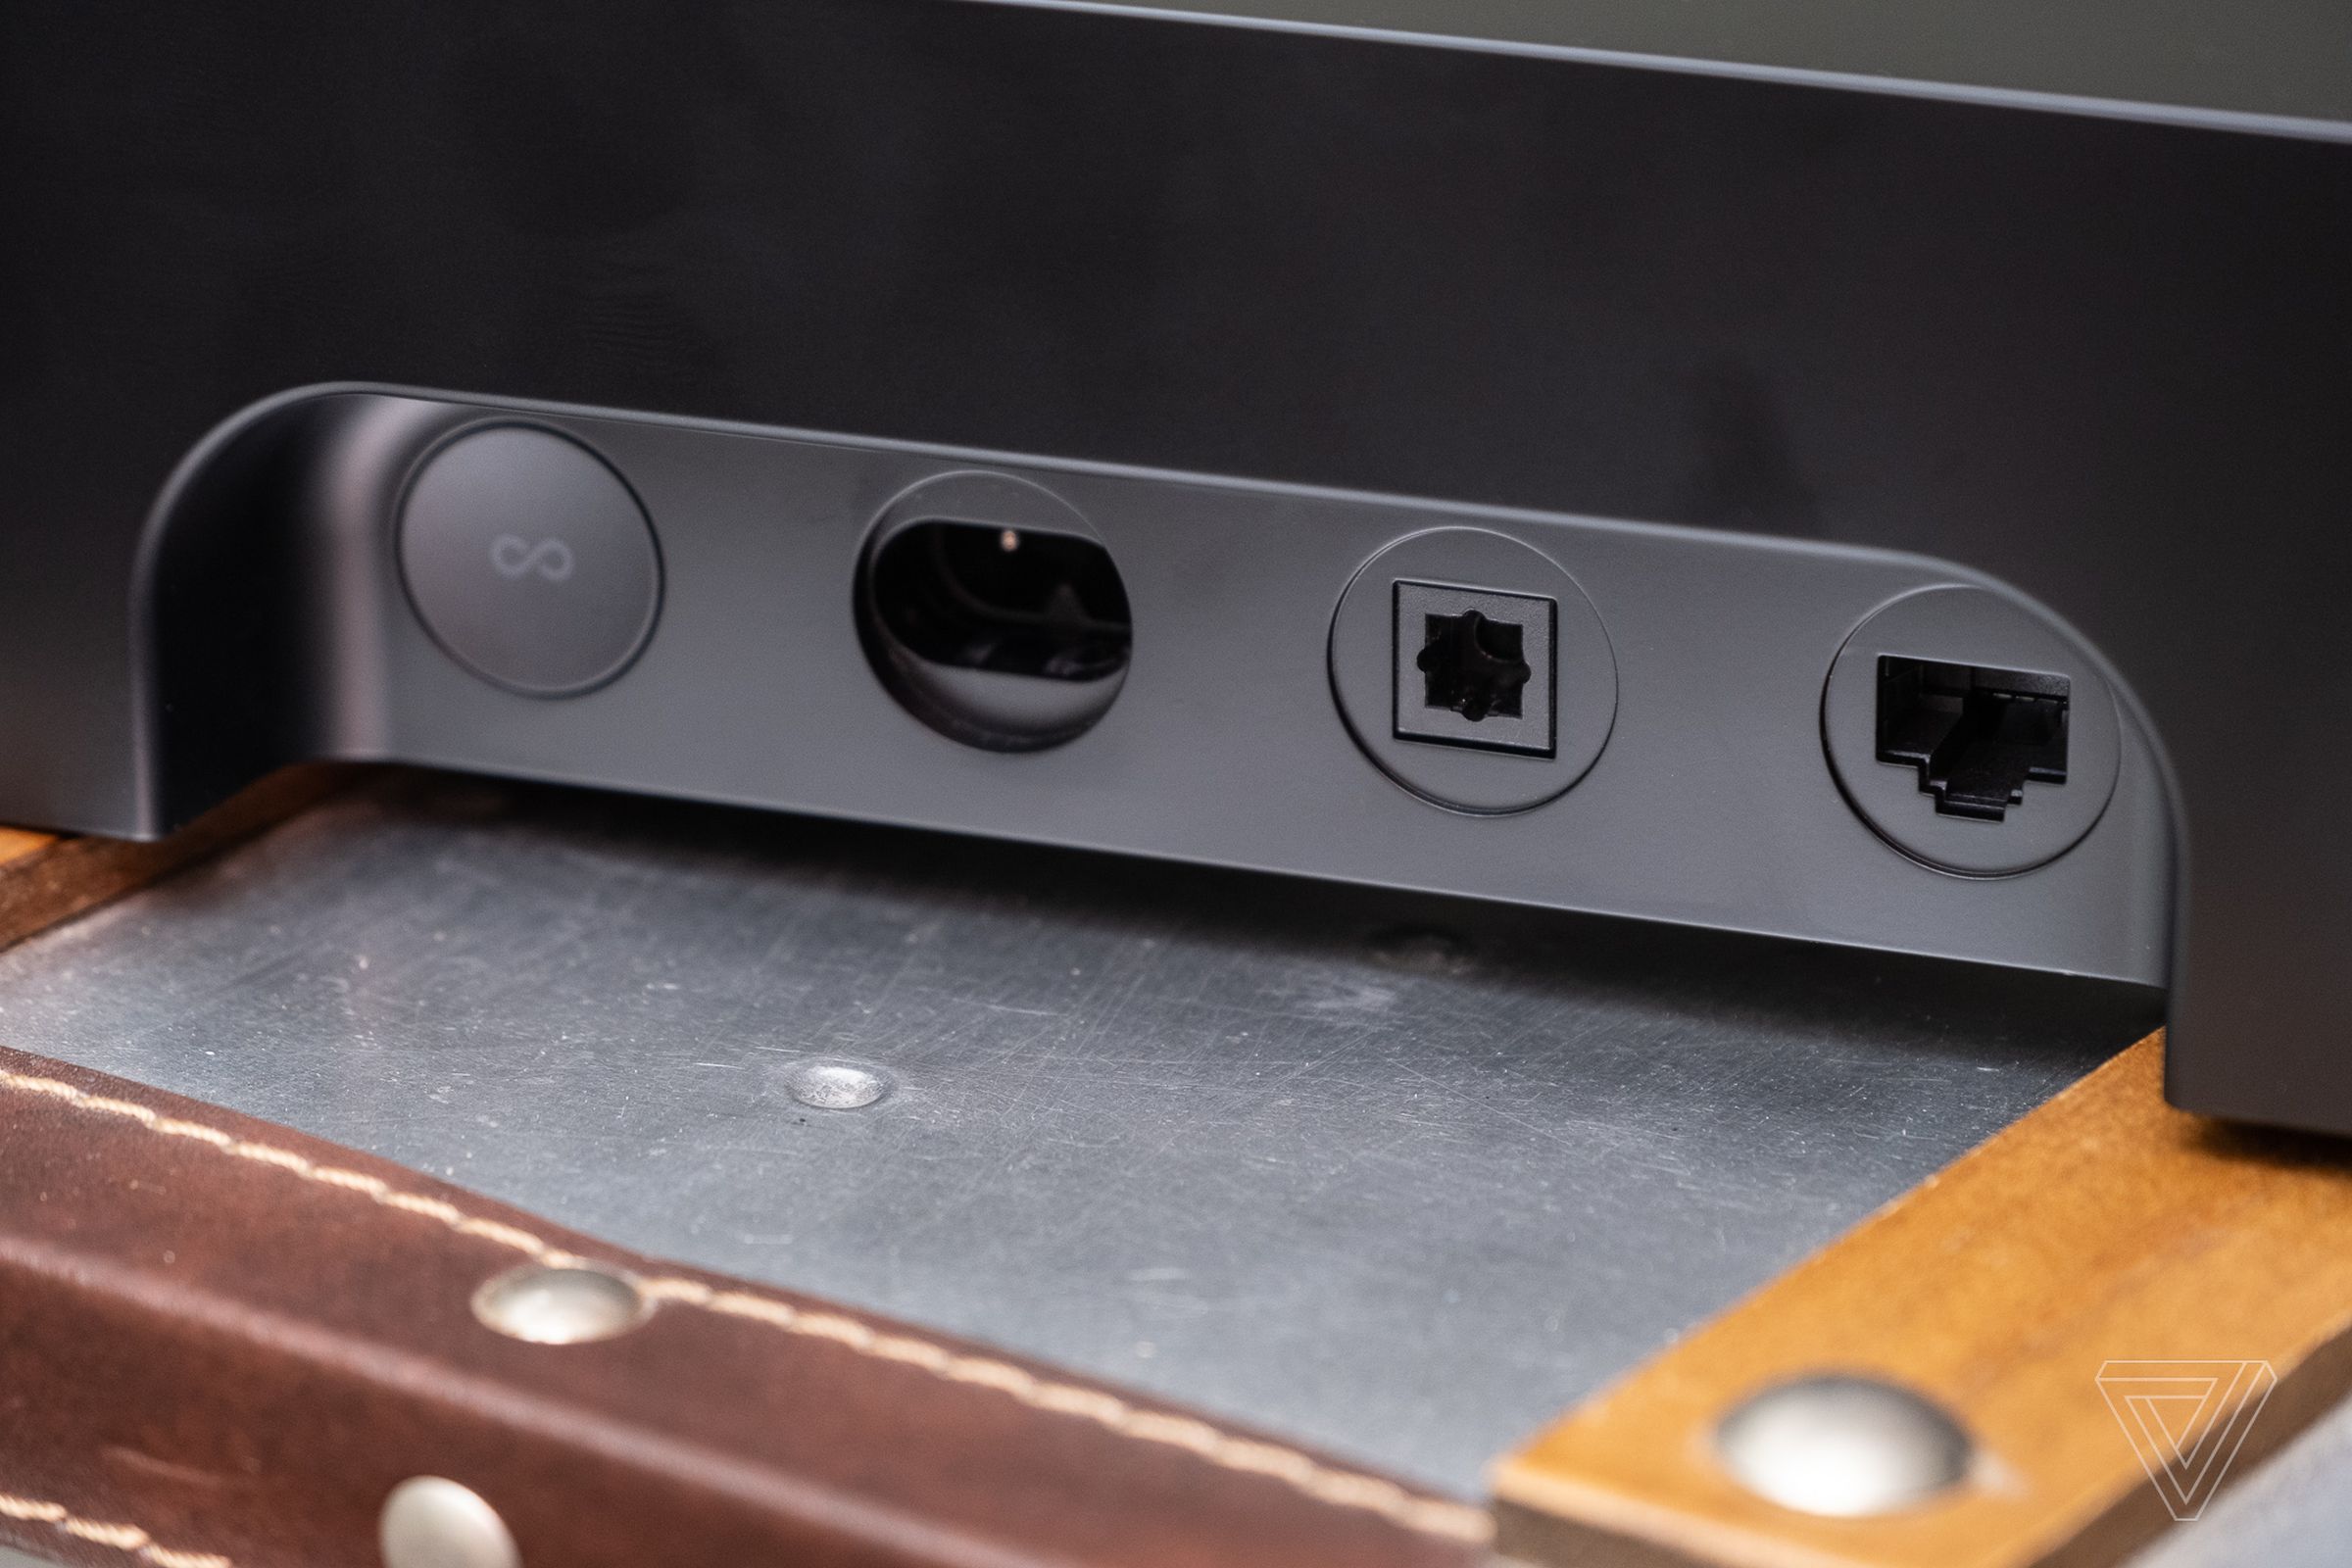 The Ray only supports optical input from TVs and doesn’t include HDMI connectivity.